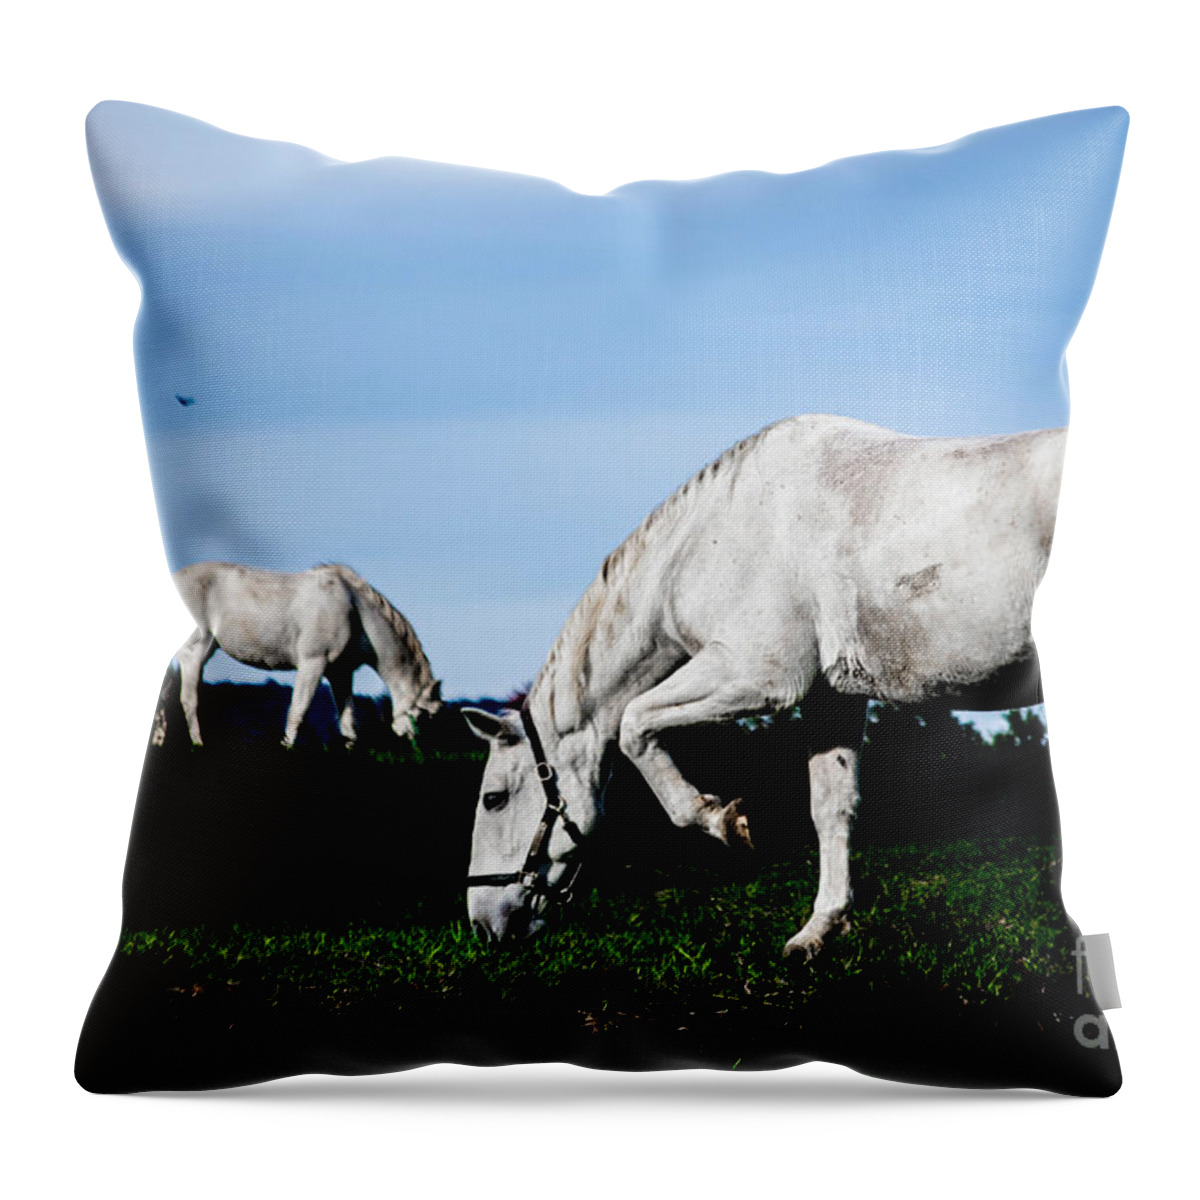 Horse Throw Pillow featuring the photograph Dainty by Carlee Ojeda